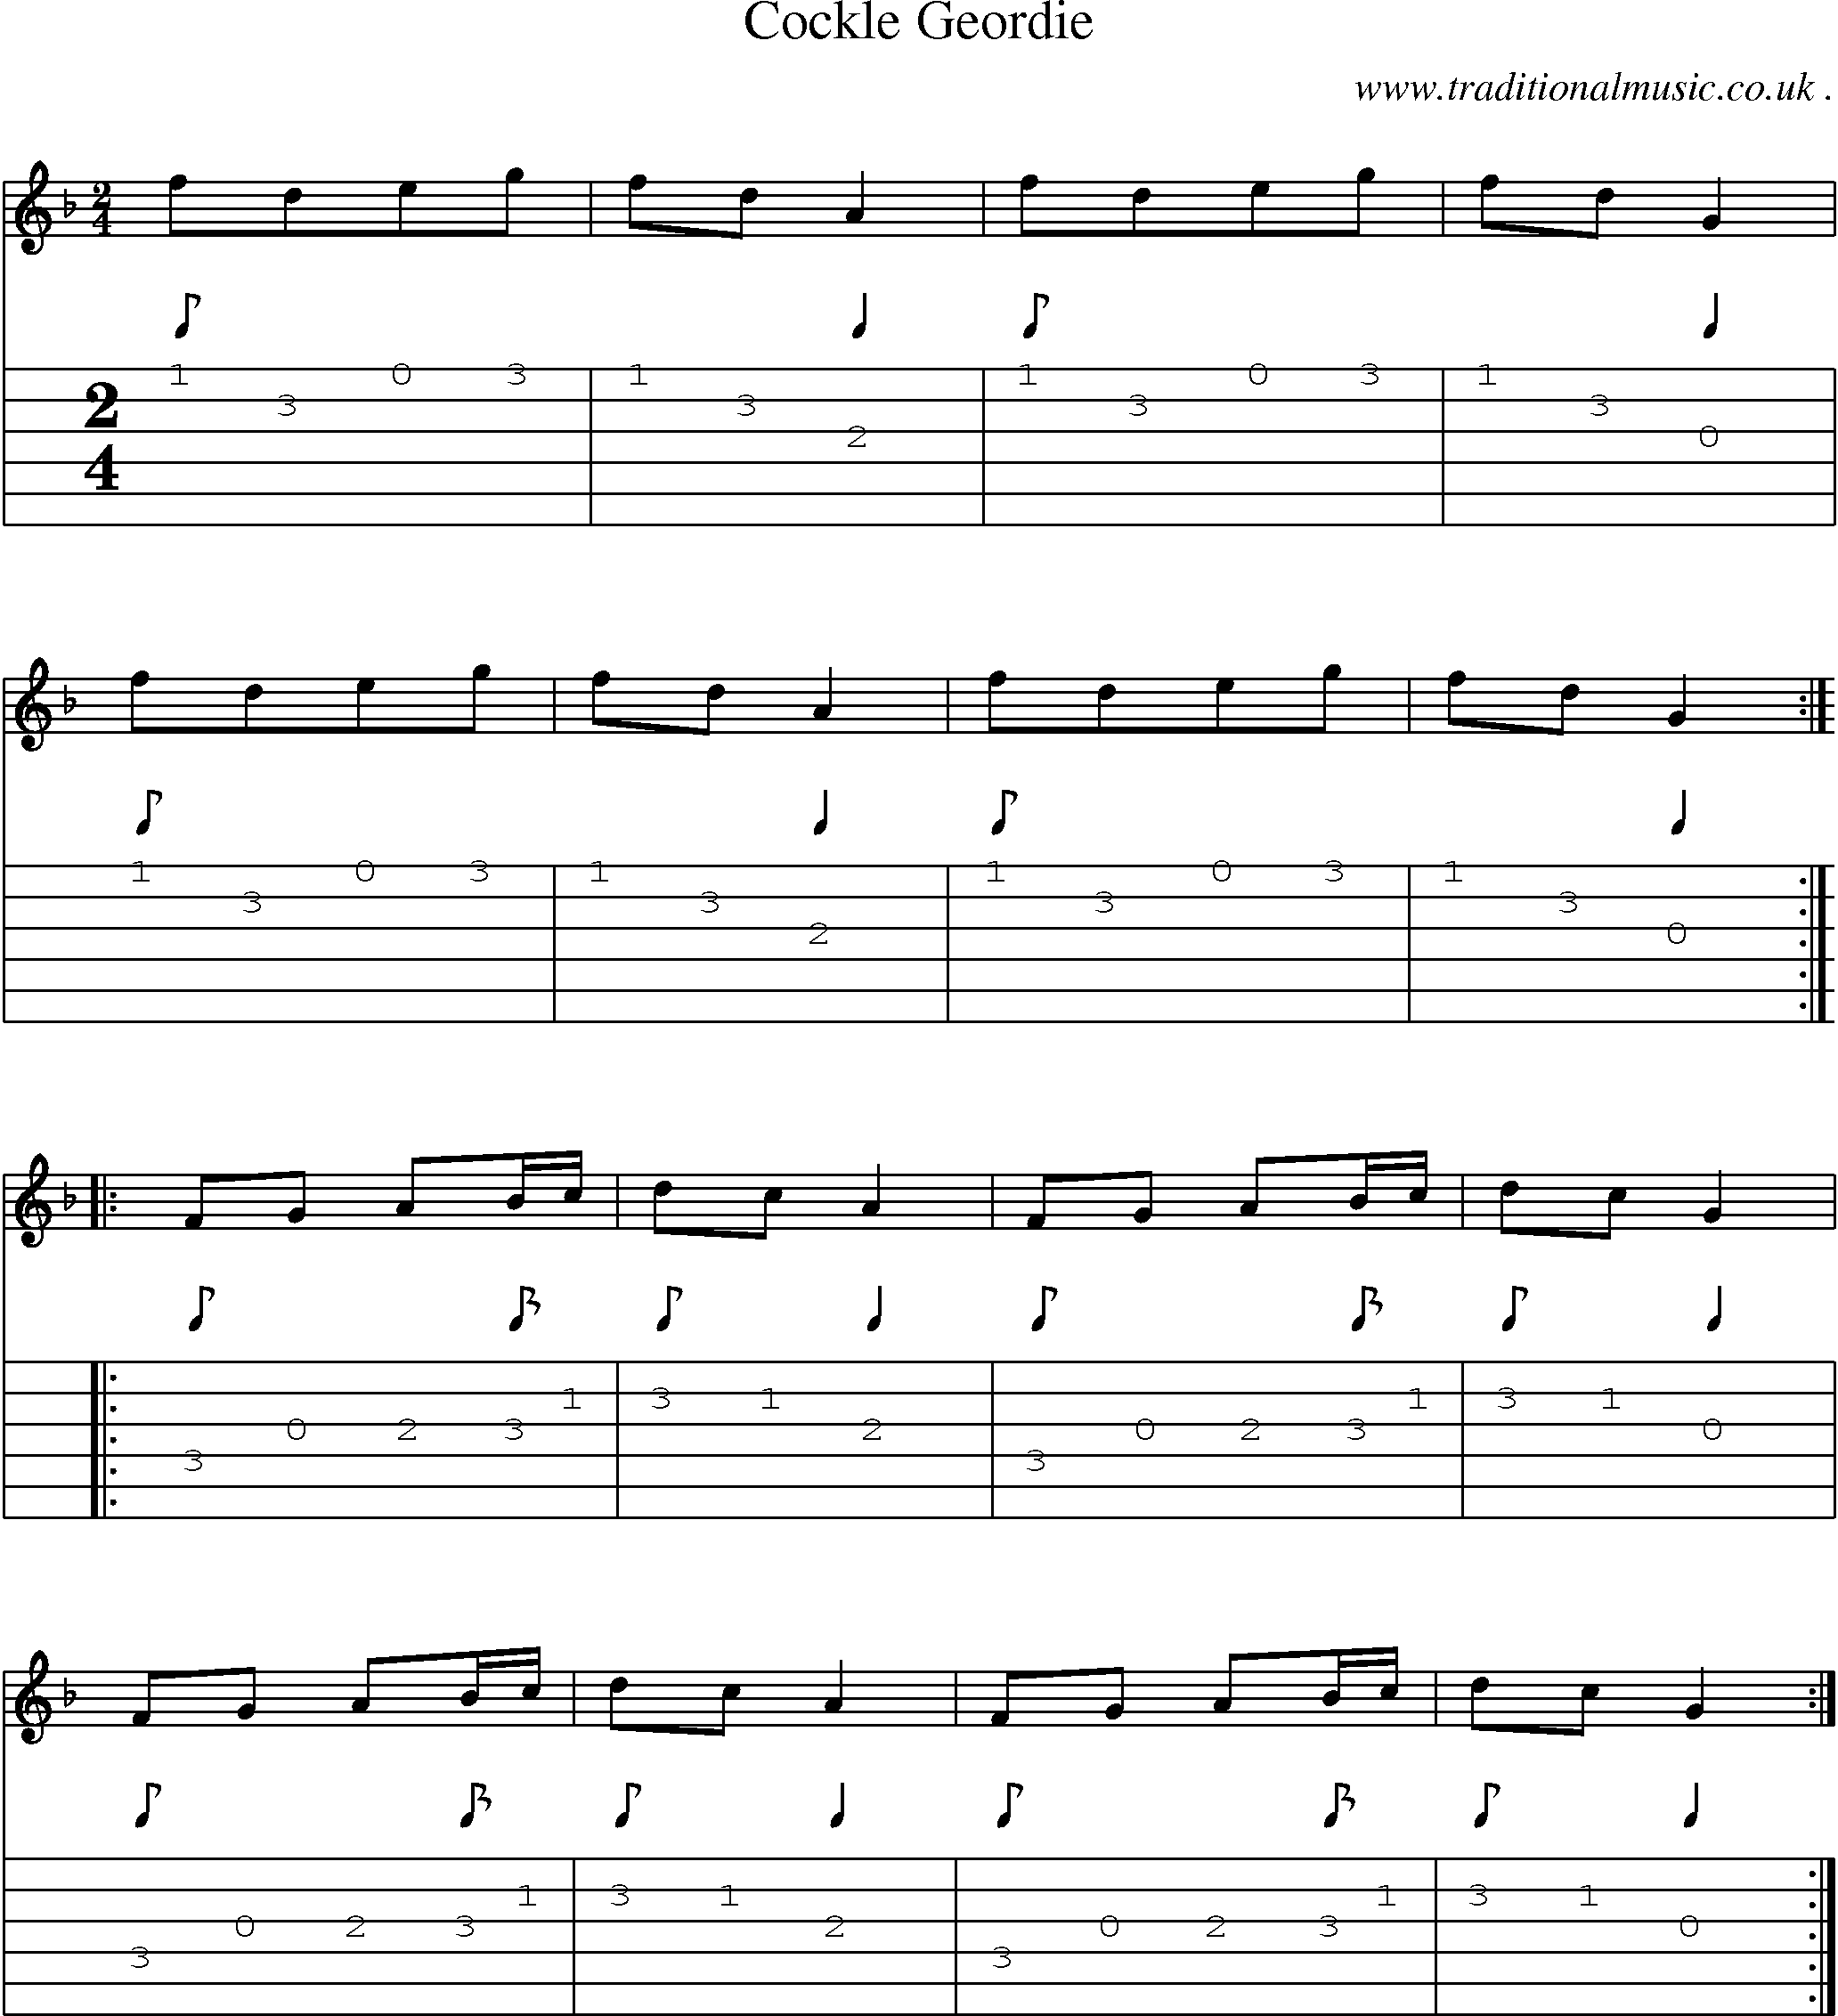 Sheet-Music and Guitar Tabs for Cockle Geordie